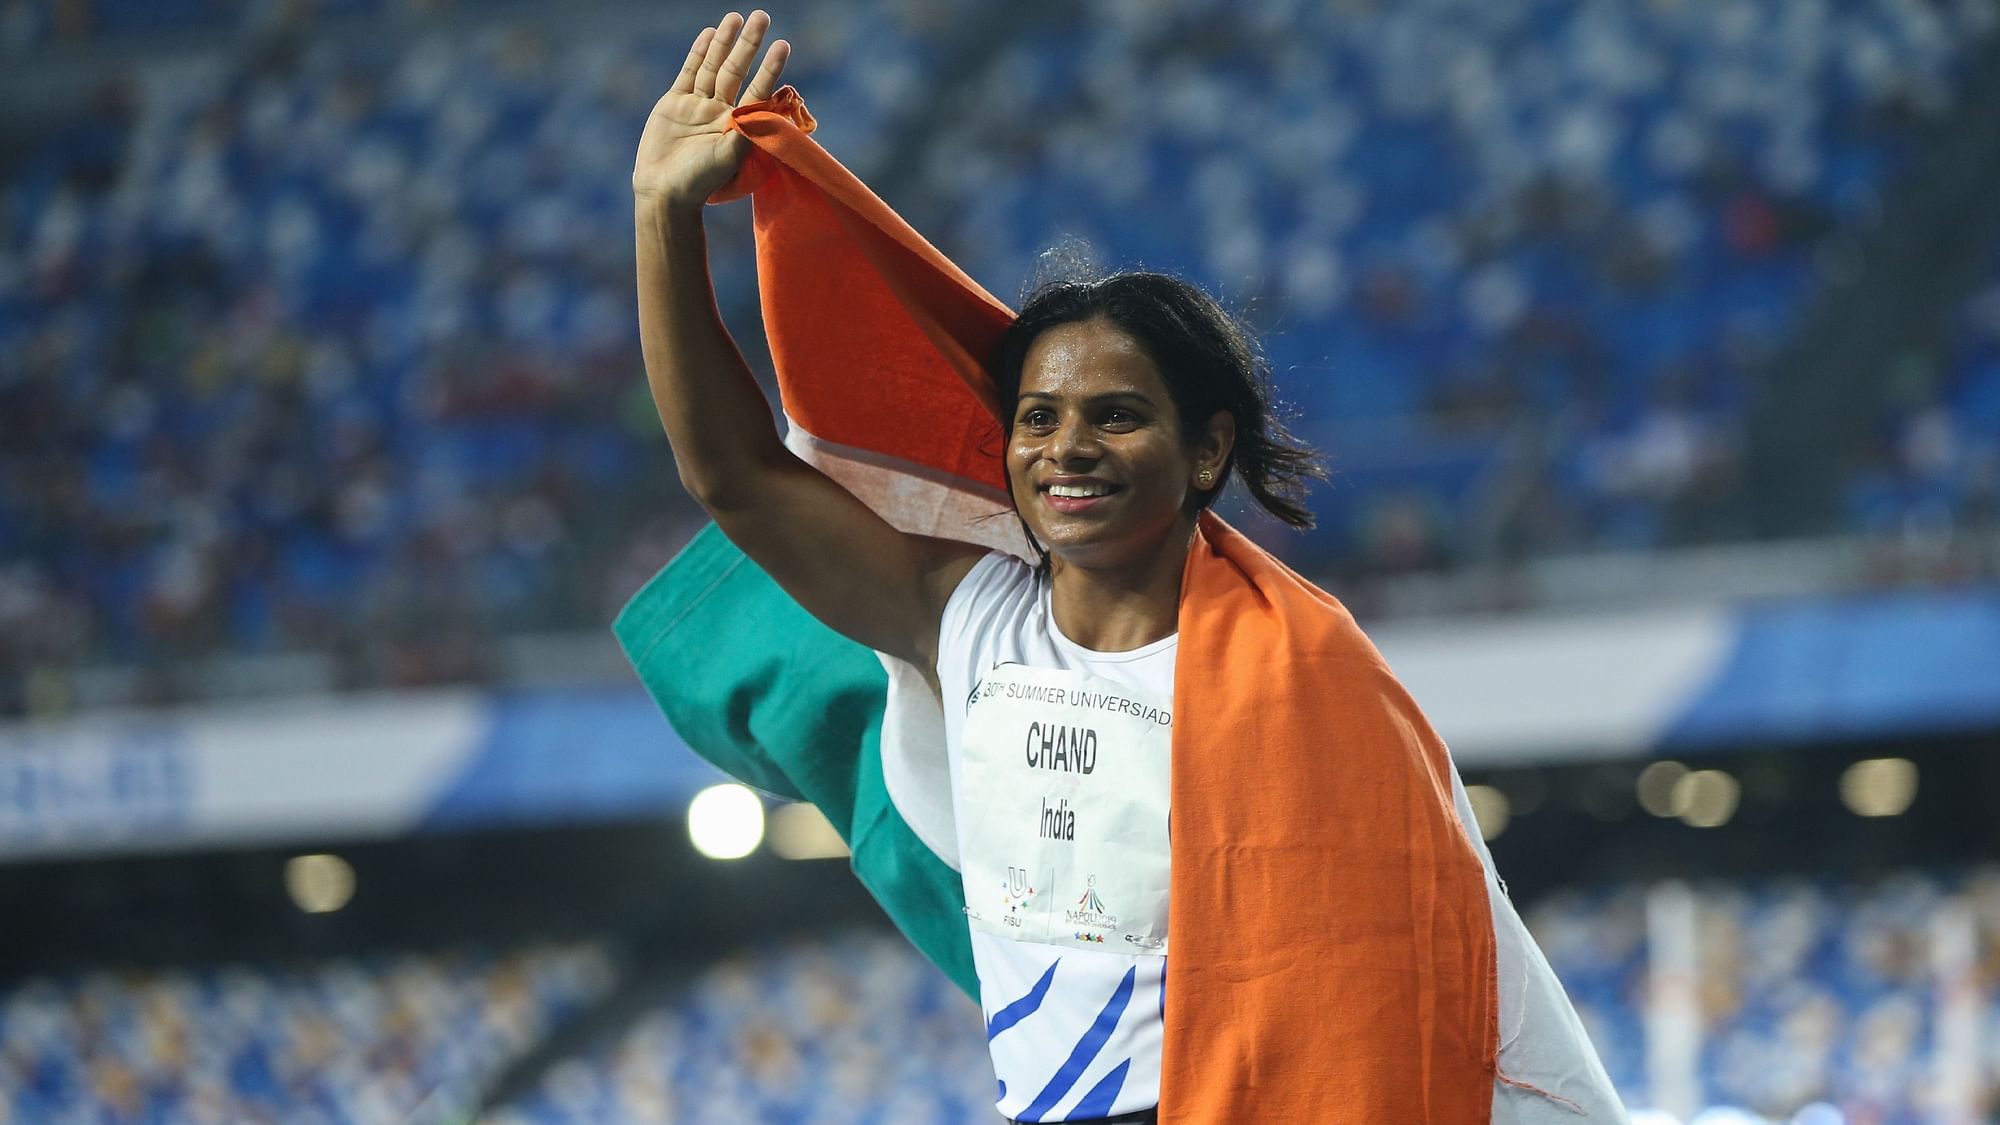 Dutee Chand became the first Indian woman track and field athlete to clinch a gold medal in the World Universiade.